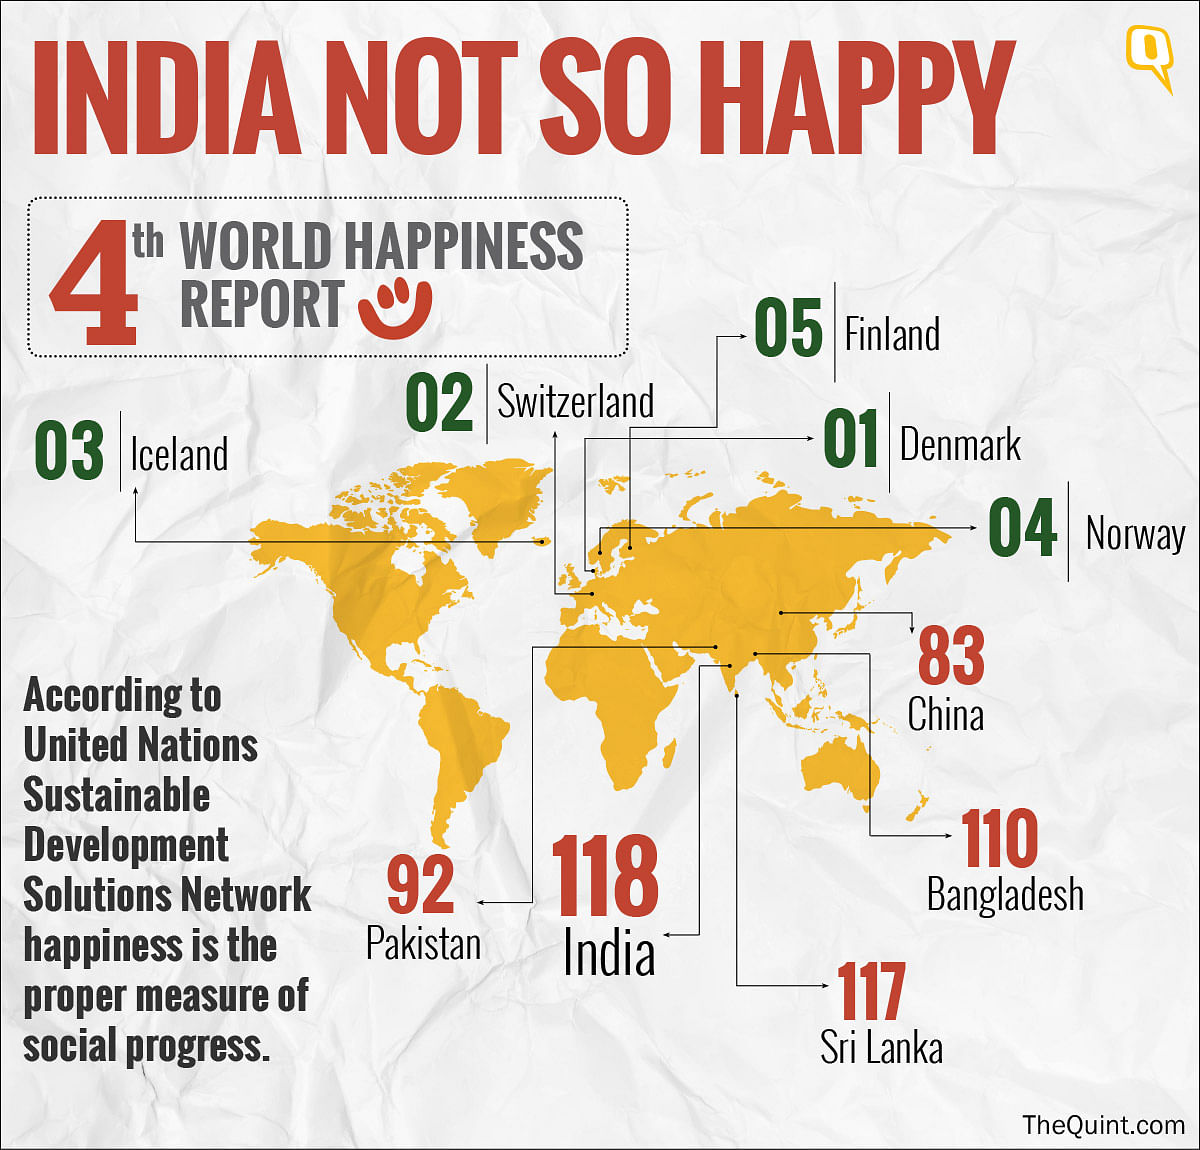 India ranks 118 in the World Happiness Report 2016. Clearly, we are not a very happy nation. But why?